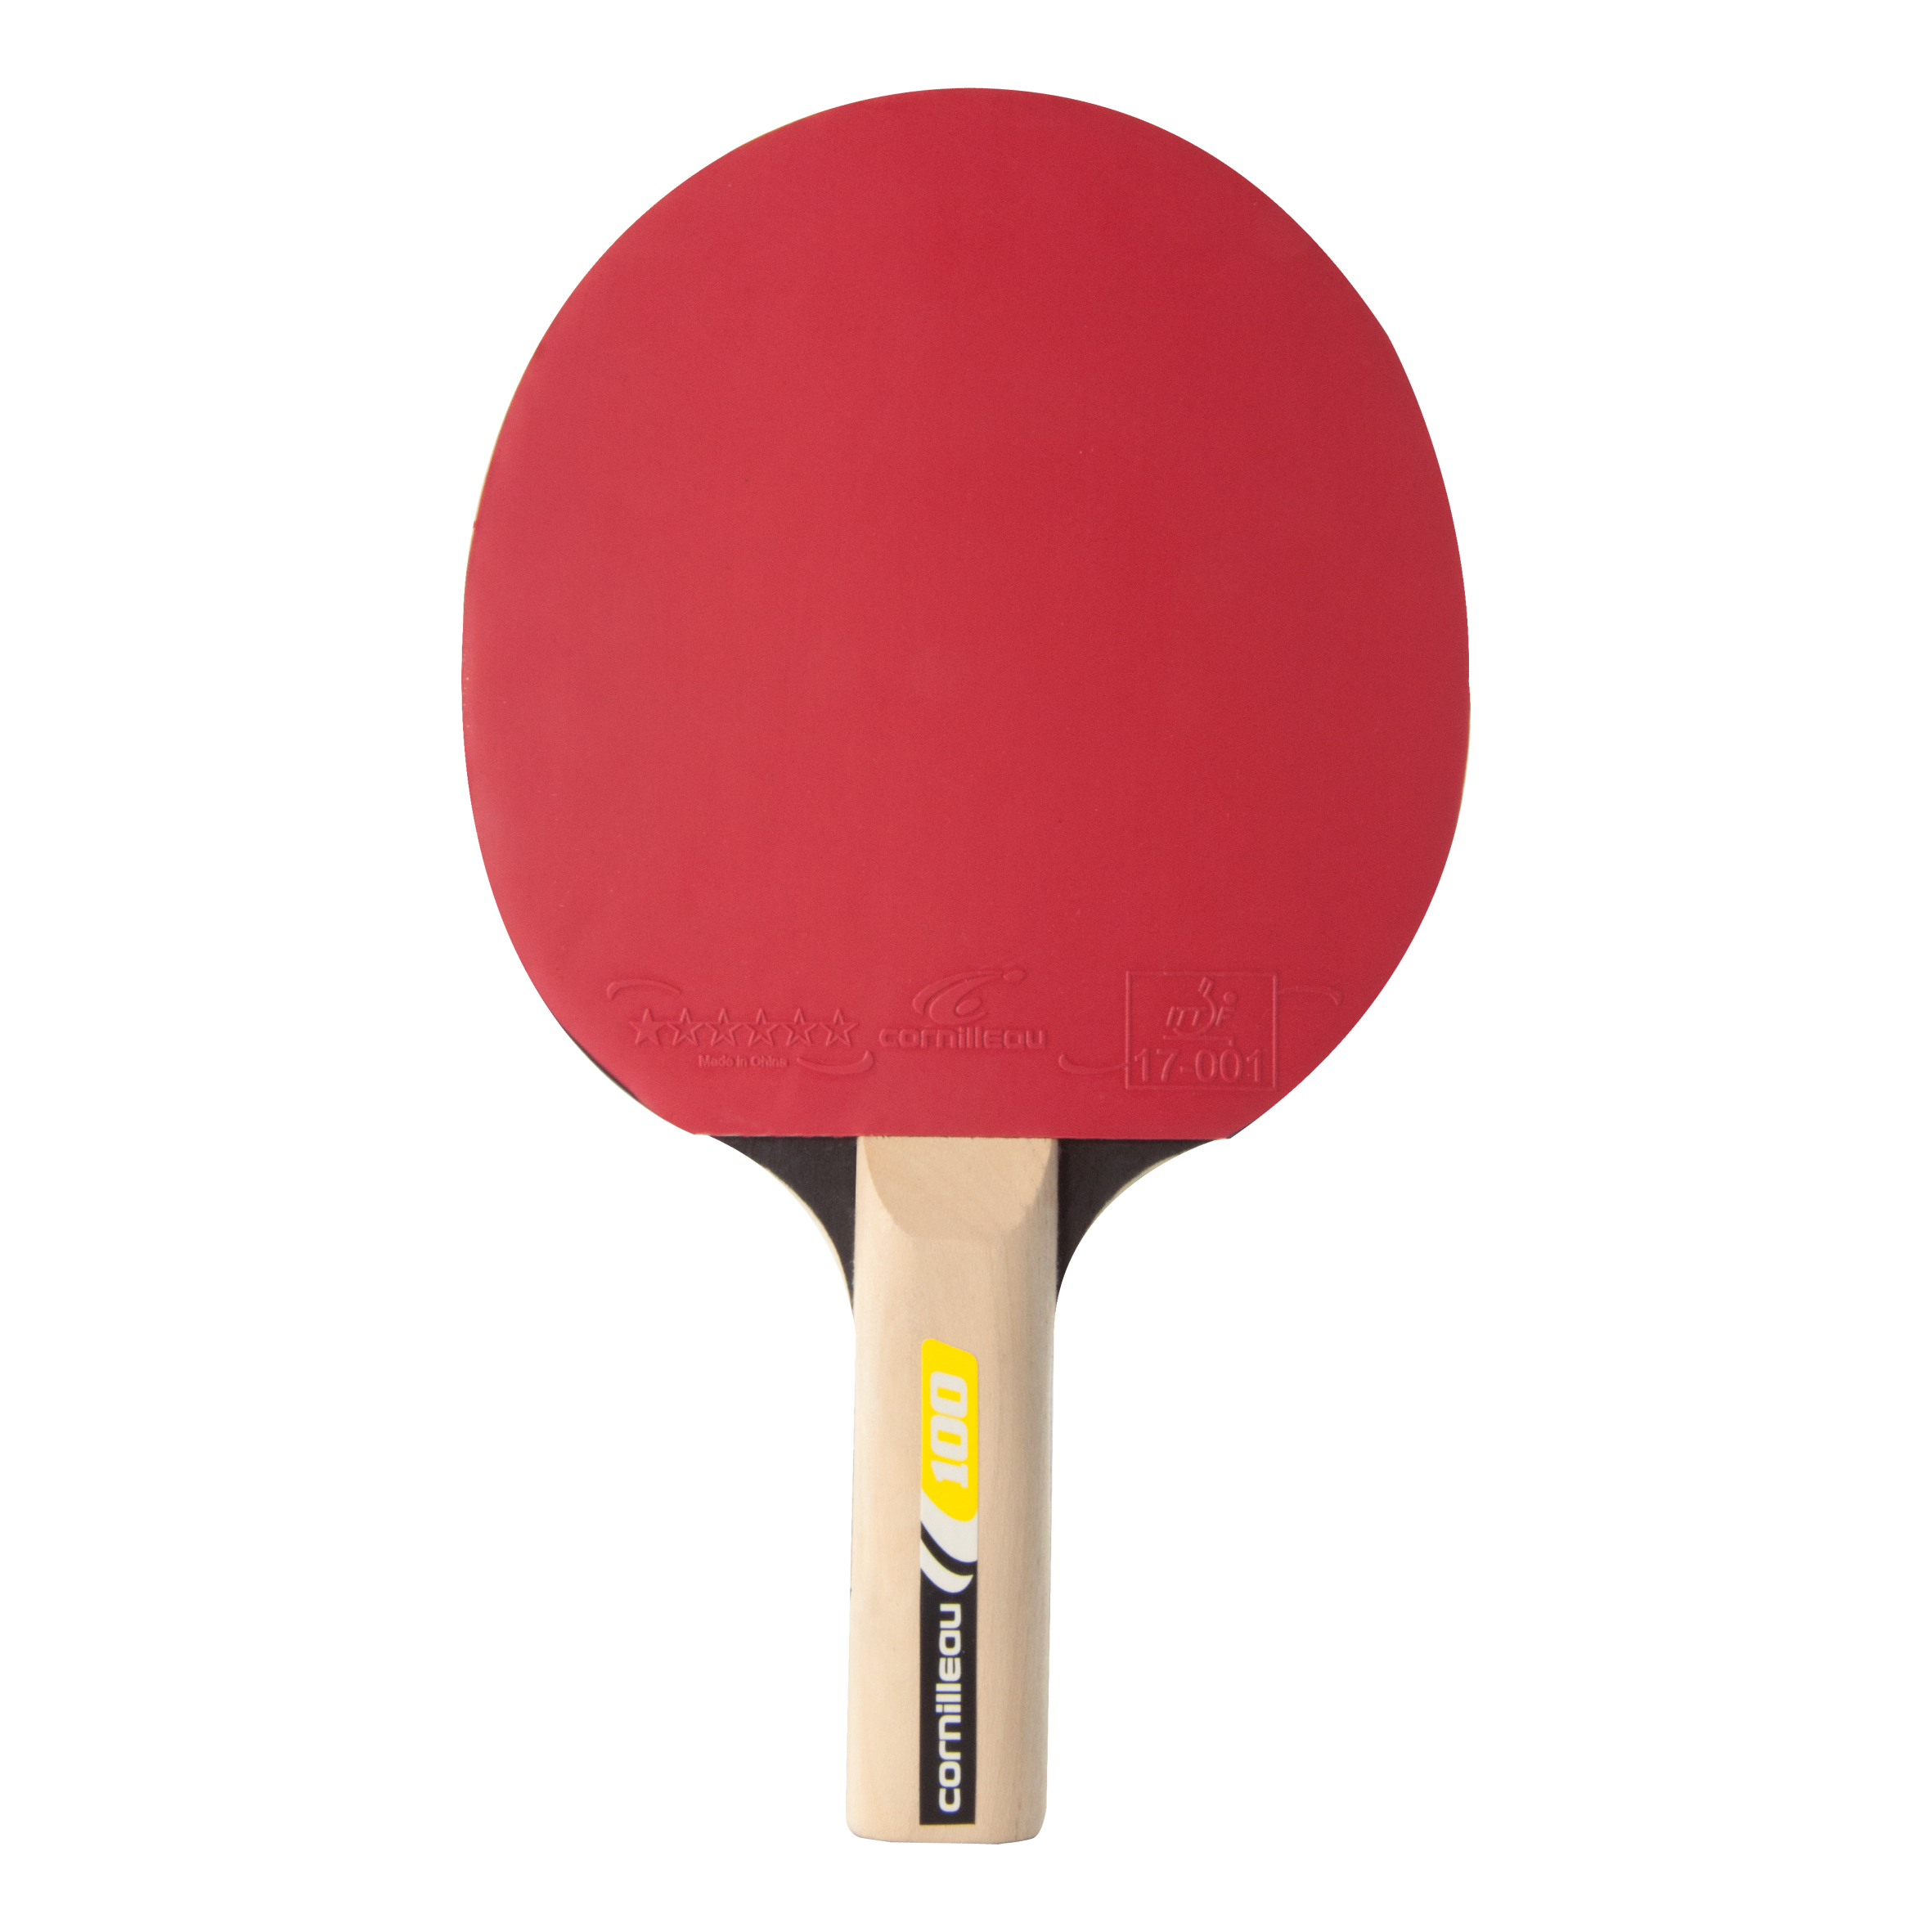 Table Tennis Racket And Ball PNG Image Background